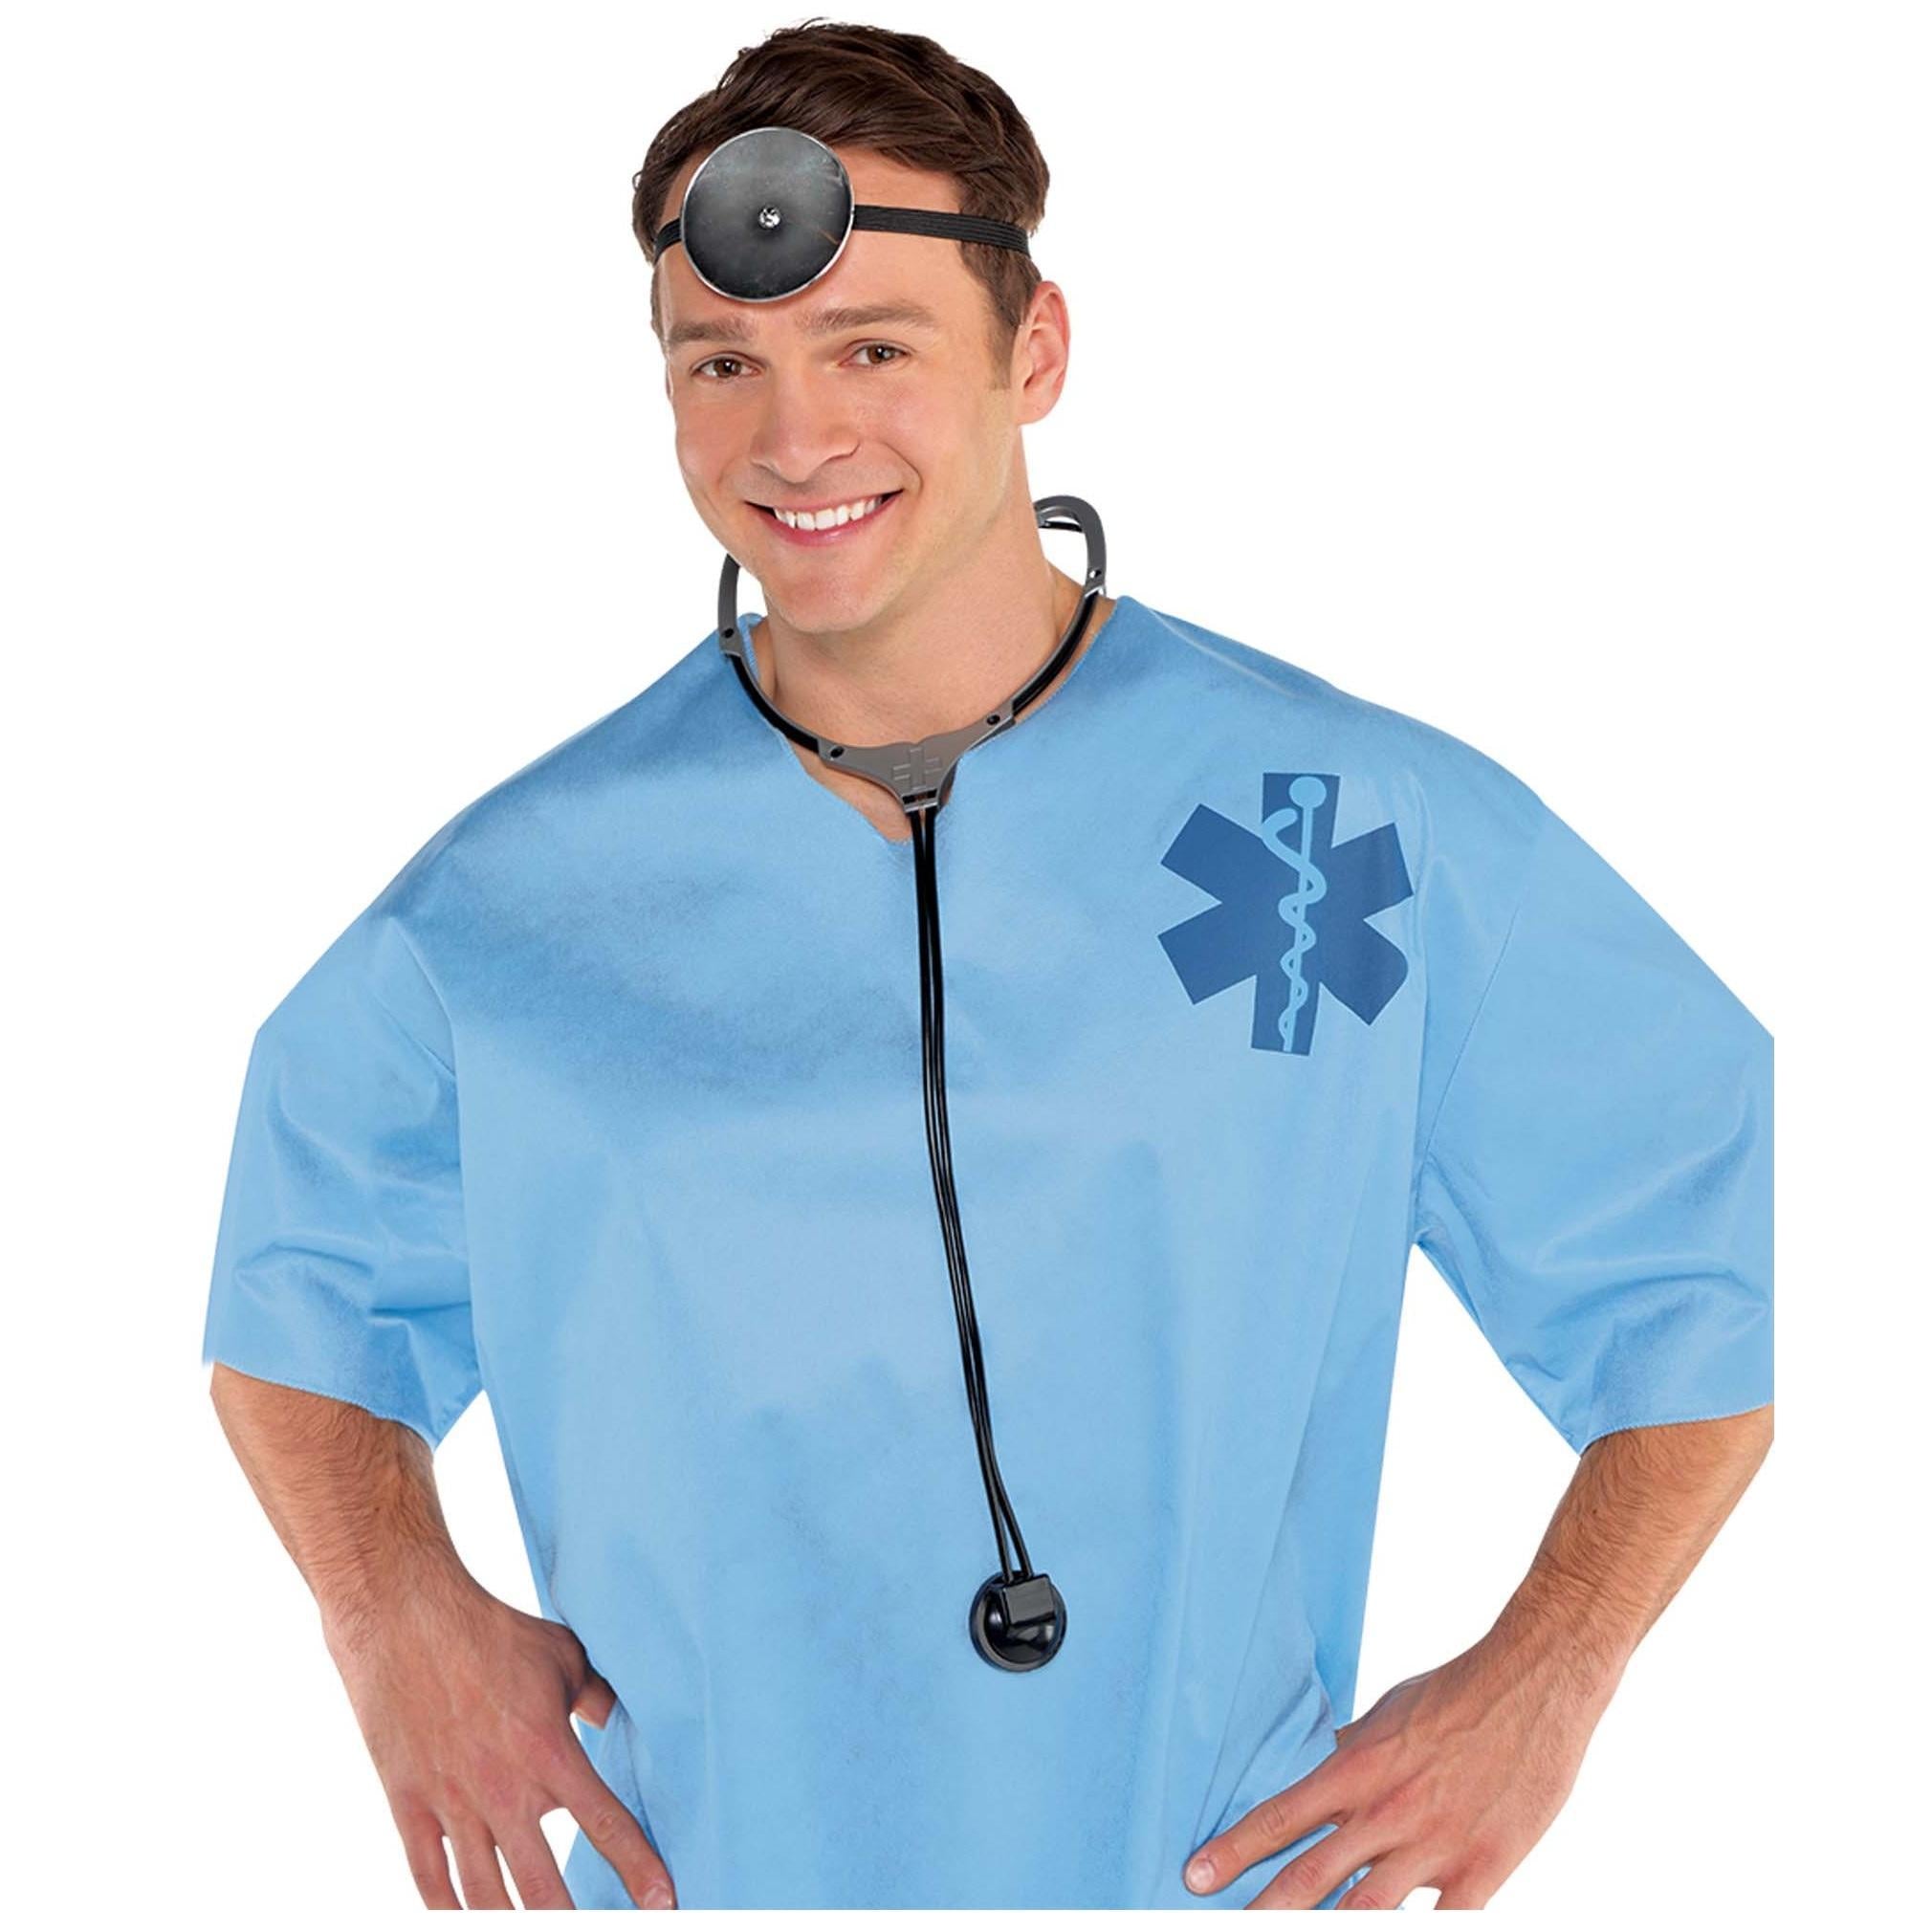 Doctor Examination Kit Costumes & Apparel - Party Centre - Party Centre